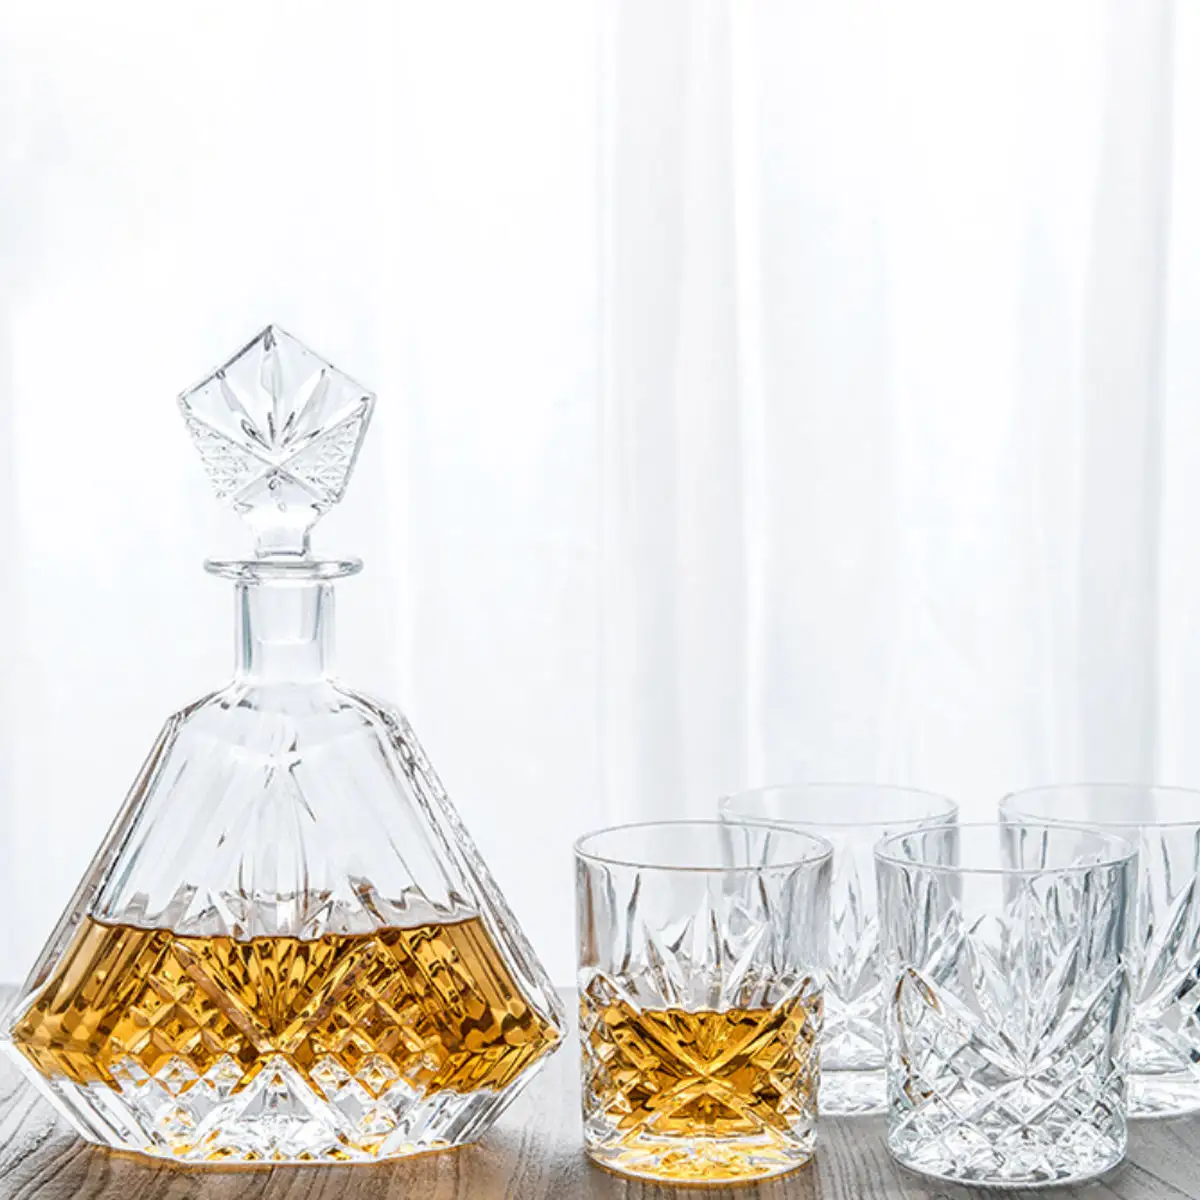 Hand Crafted Crystal Irish Cut Triangular Glass Bottle Wine Liquor Whiskey Decanter Set With Whisky Glasses